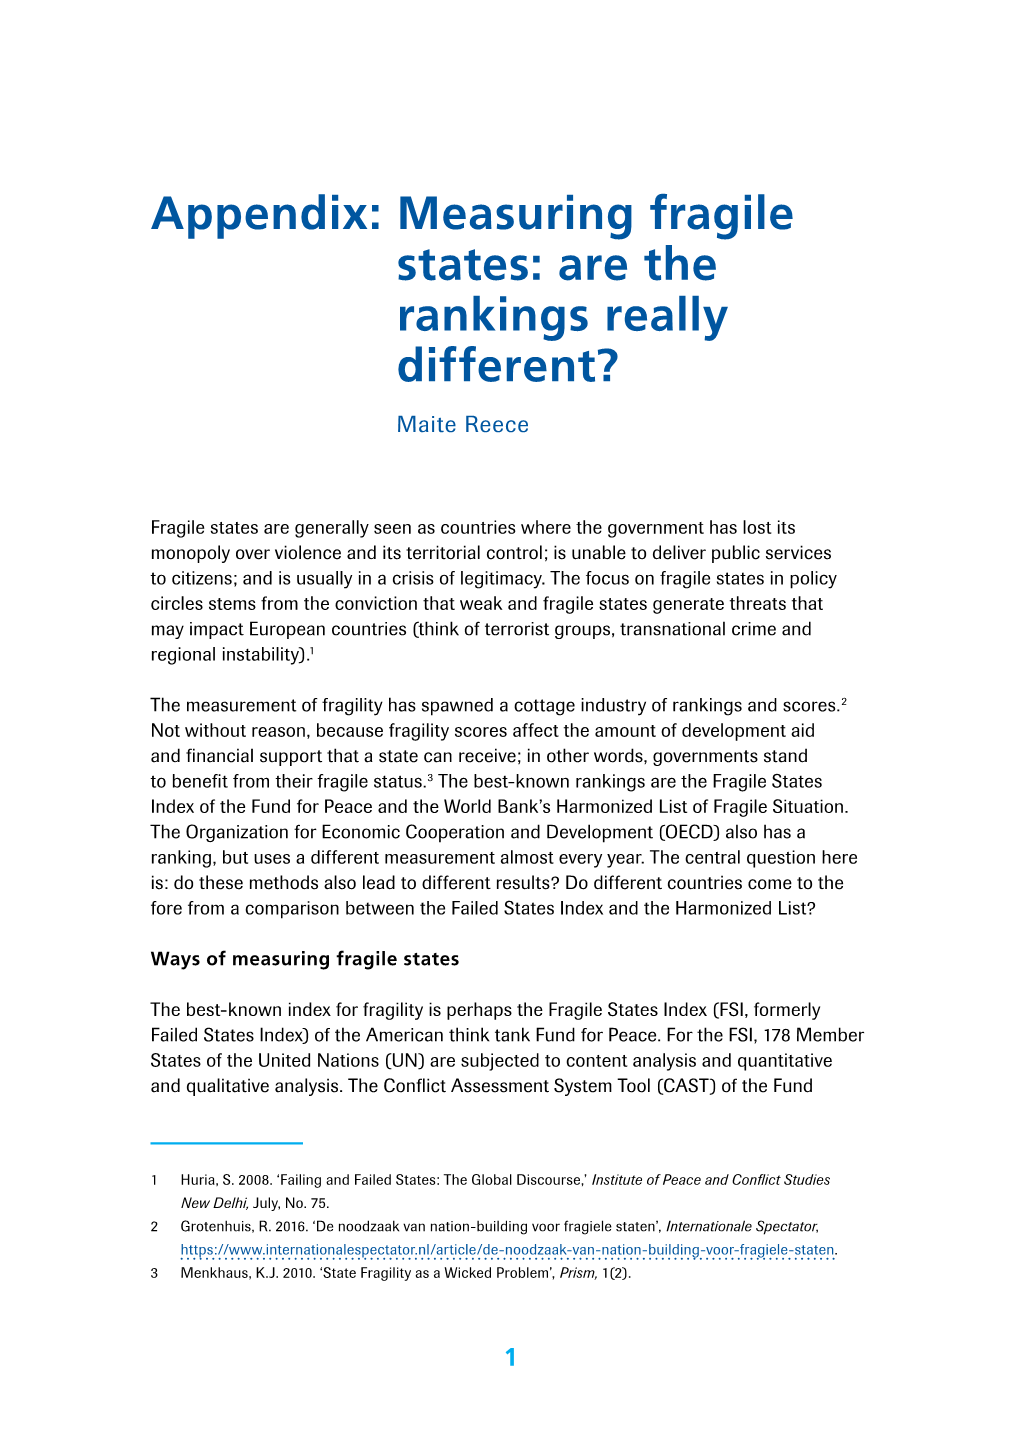 Appendix: Measuring Fragile States: Are the Rankings Really Different?